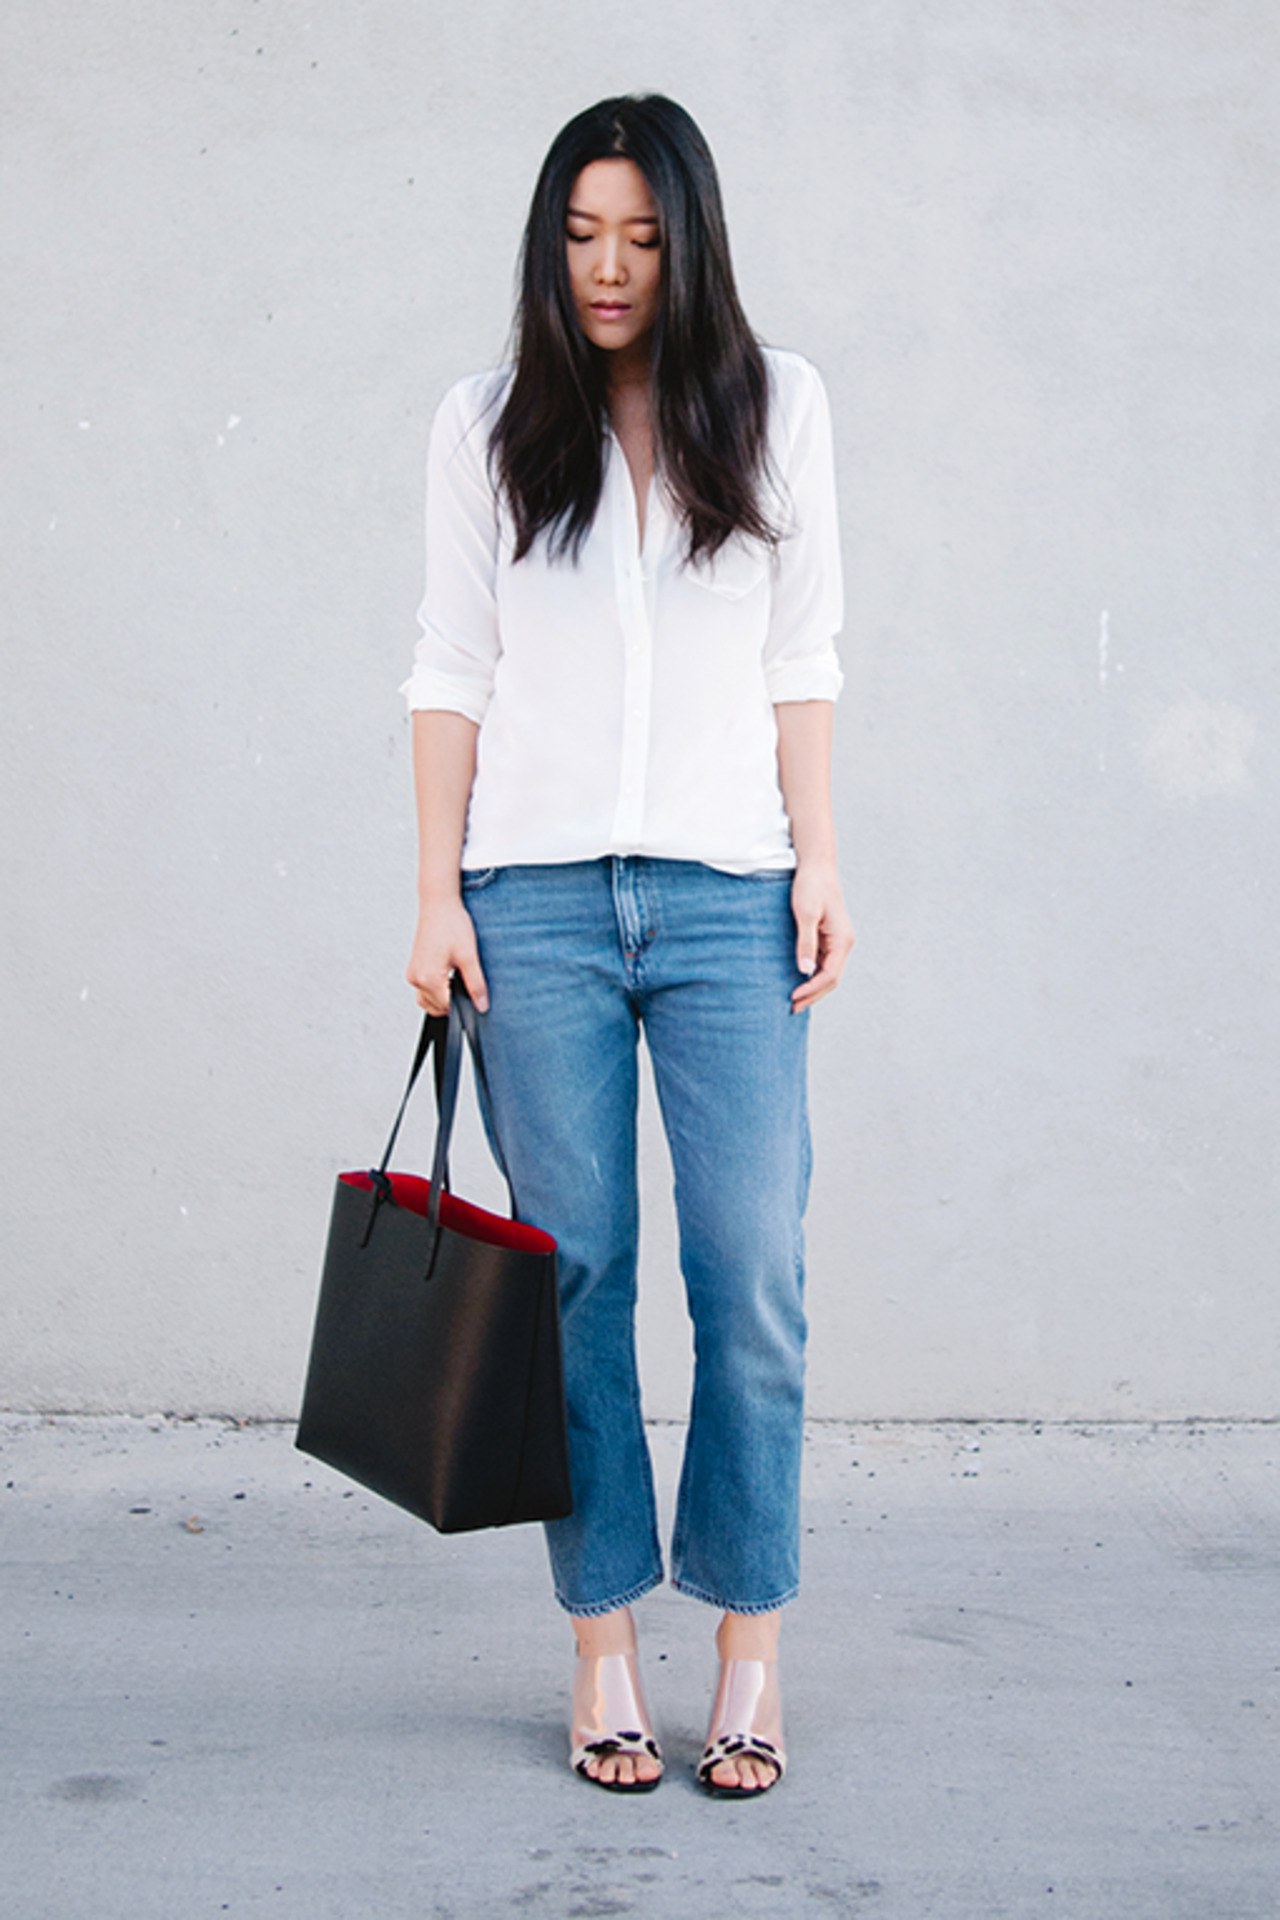 white shirt outfit ideas weekend jeans statement heels andy heart